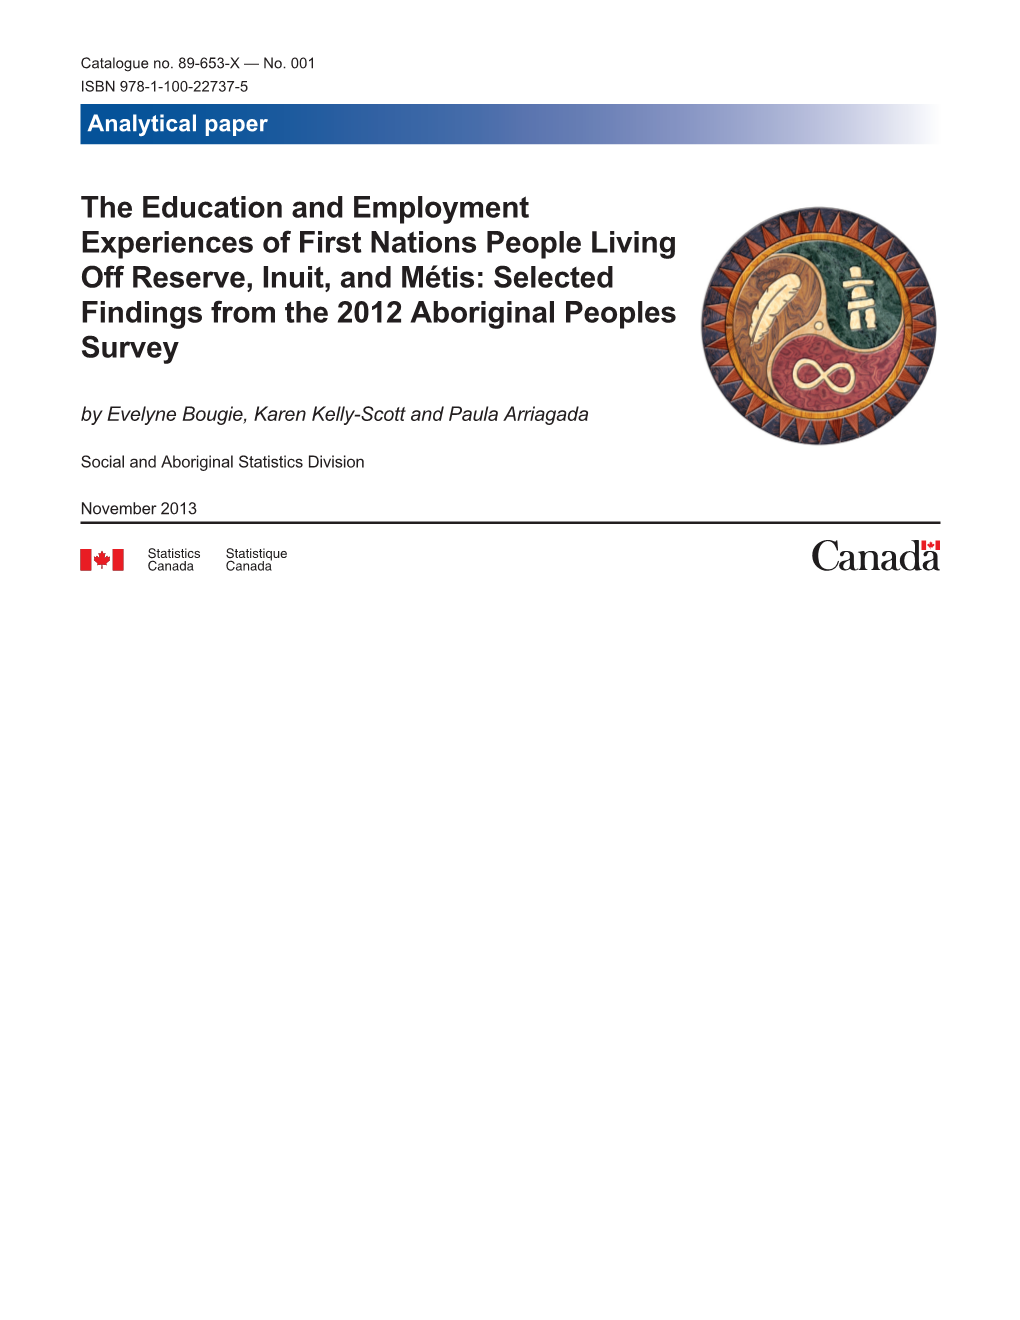 The Education and Employment Experiences of First Nations People